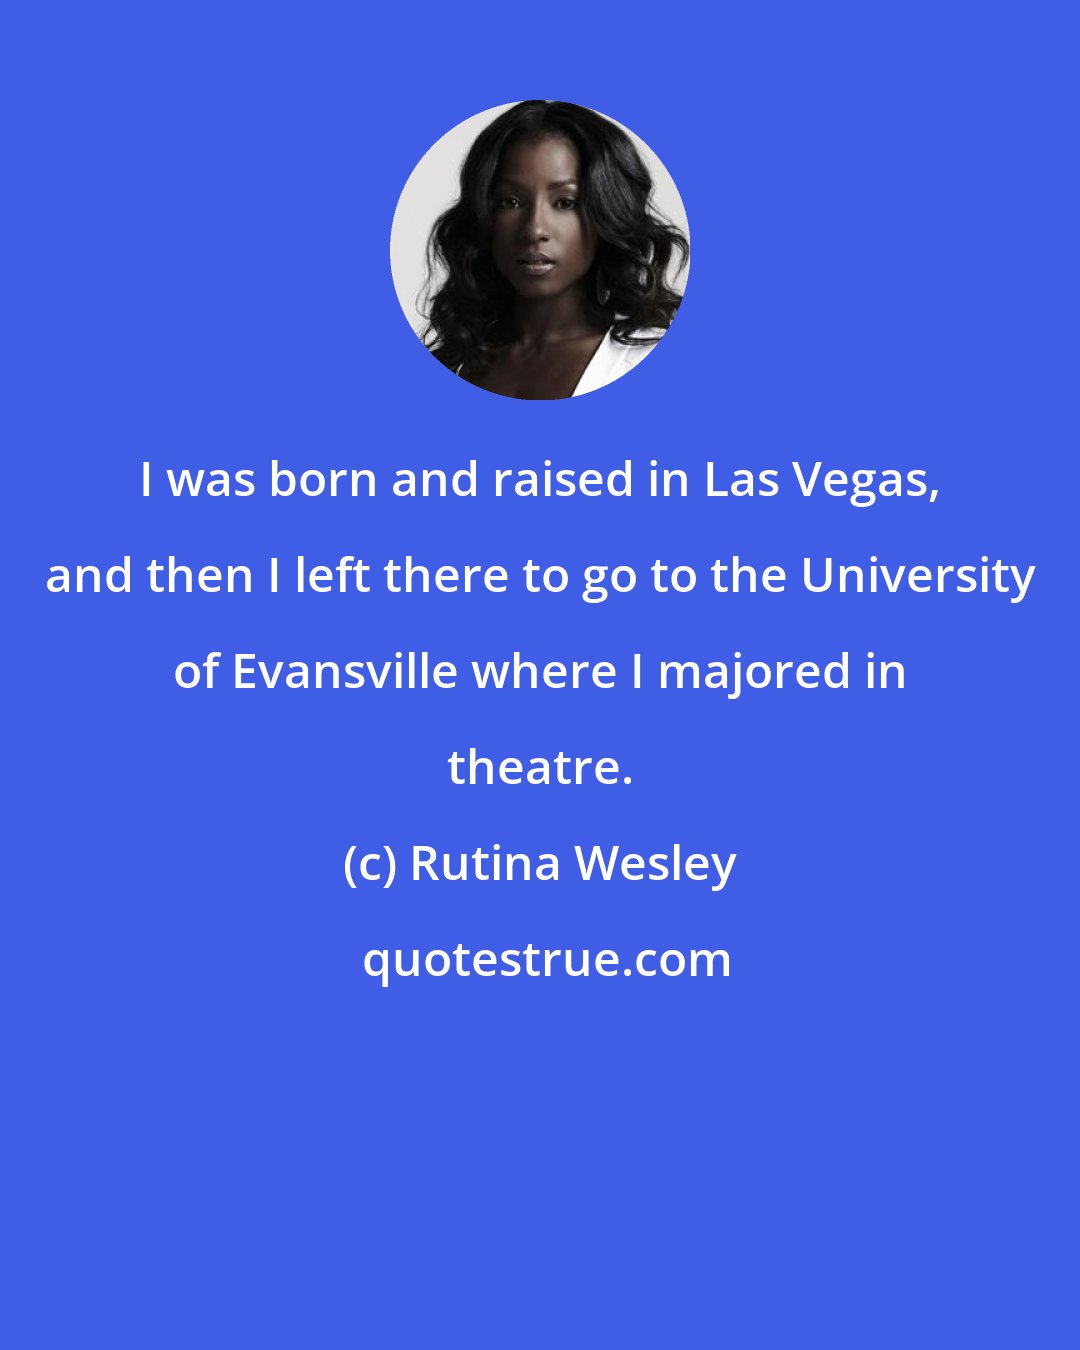 Rutina Wesley: I was born and raised in Las Vegas, and then I left there to go to the University of Evansville where I majored in theatre.